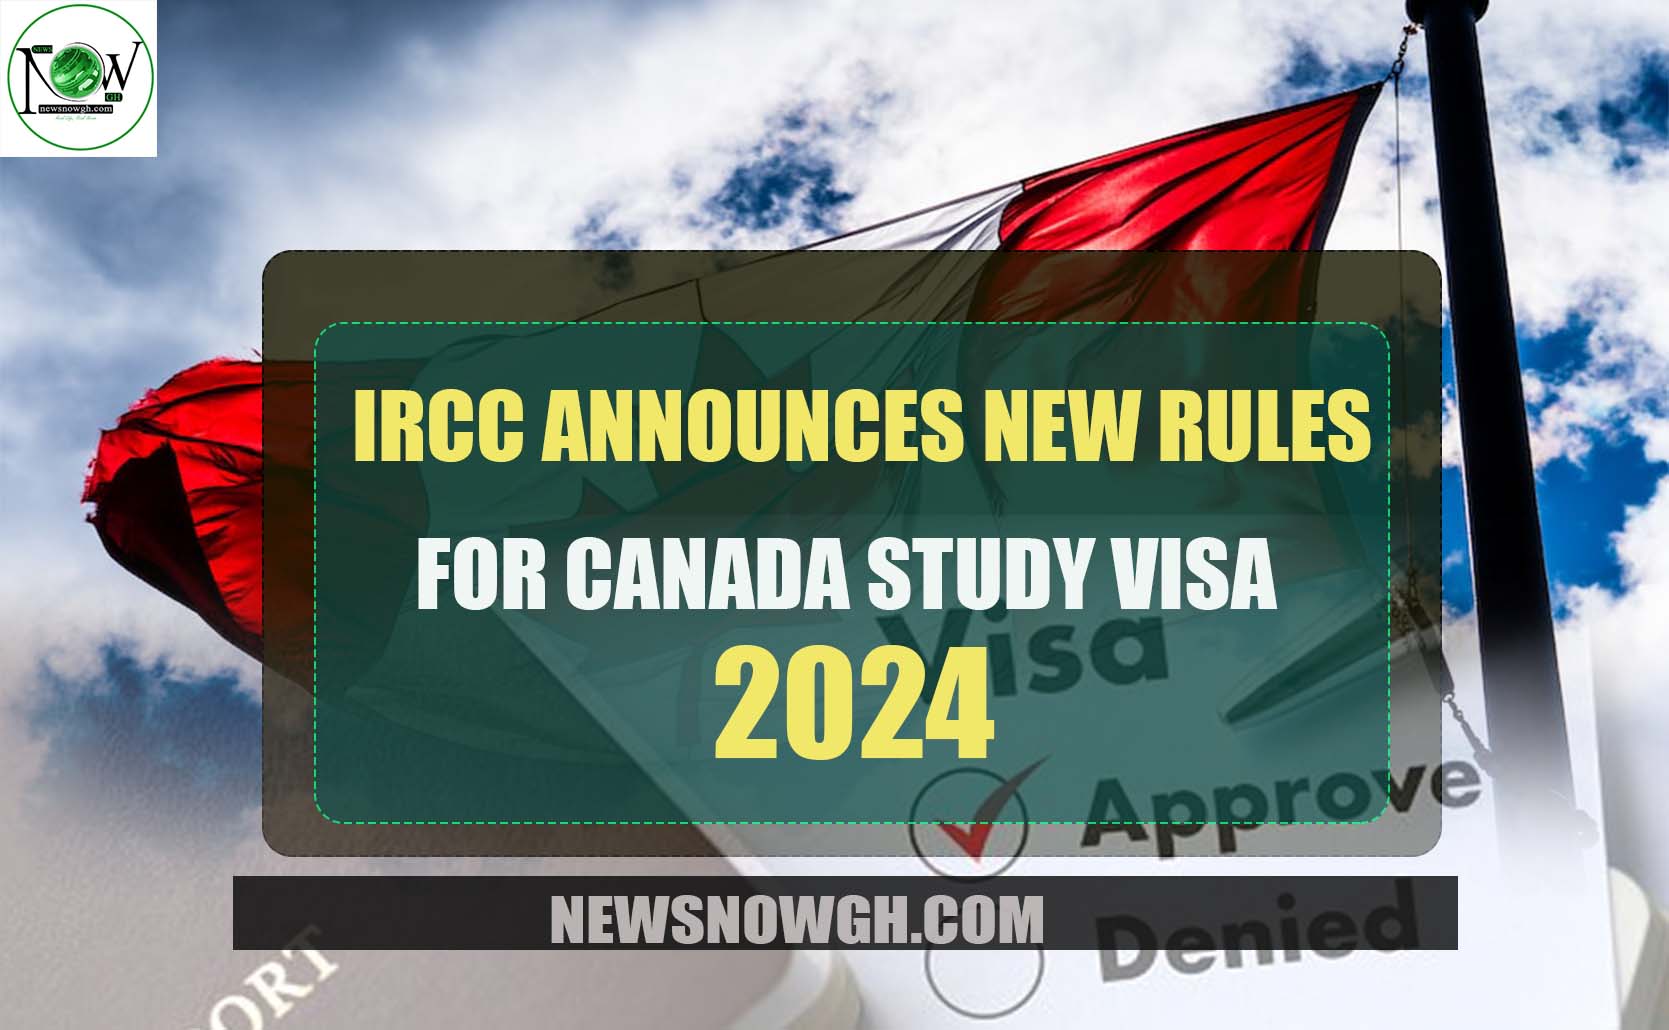 IRCC Announces New Rules for Canada Study Visa 2024